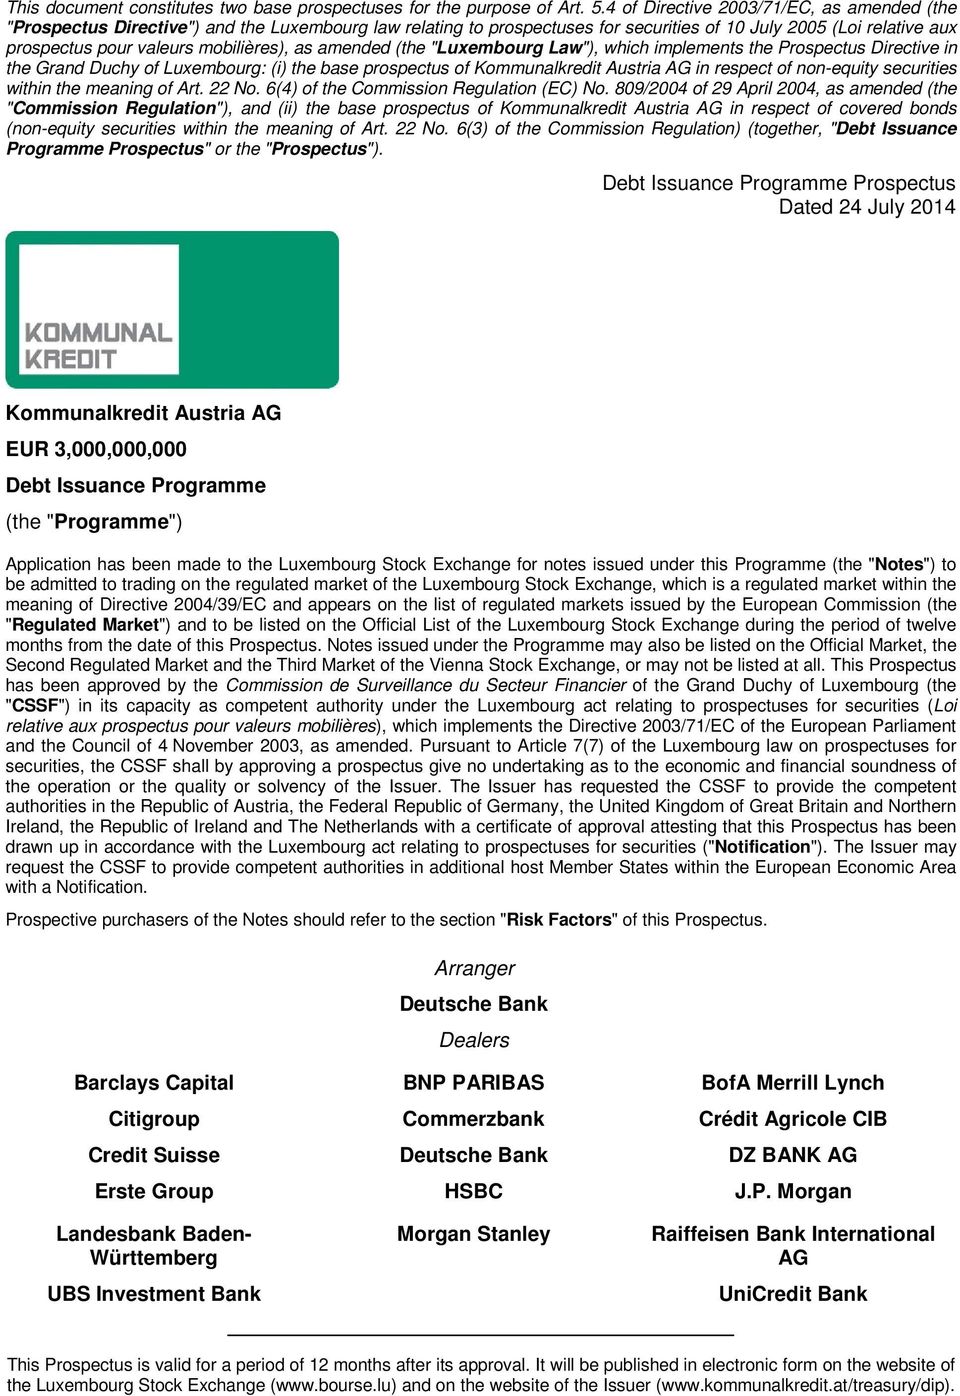 mobilières), as amended (the "Luxembourg Law"), which implements the Prospectus Directive in the Grand Duchy of Luxembourg: (i) the base prospectus of Kommunalkredit Austria AG in respect of